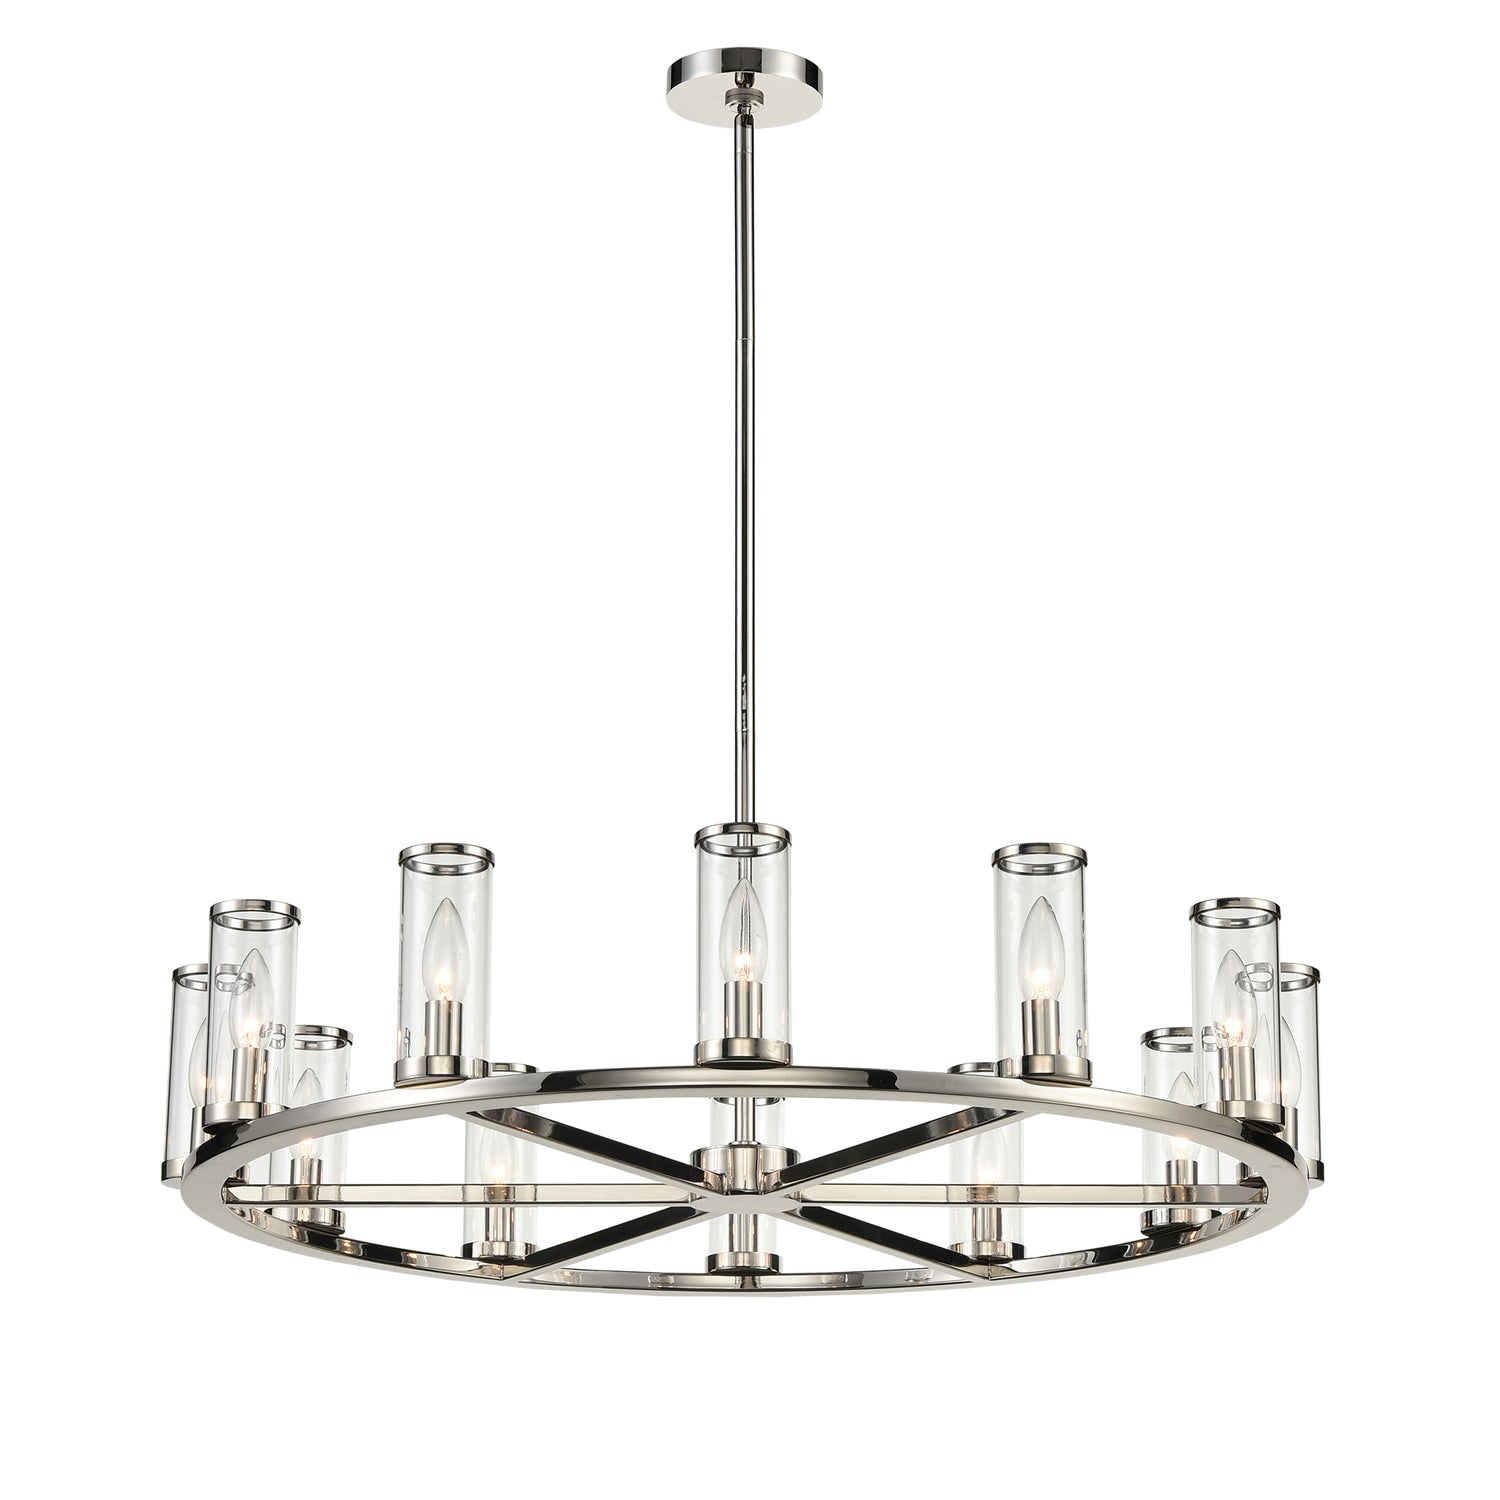 Alora Canada - 12 Light Chandelier - Revolve - Clear Glass/Natural Brass|Clear Glass/Polished Nickel|Clear Glass/Urban Bronze- Union Lighting Luminaires Decor